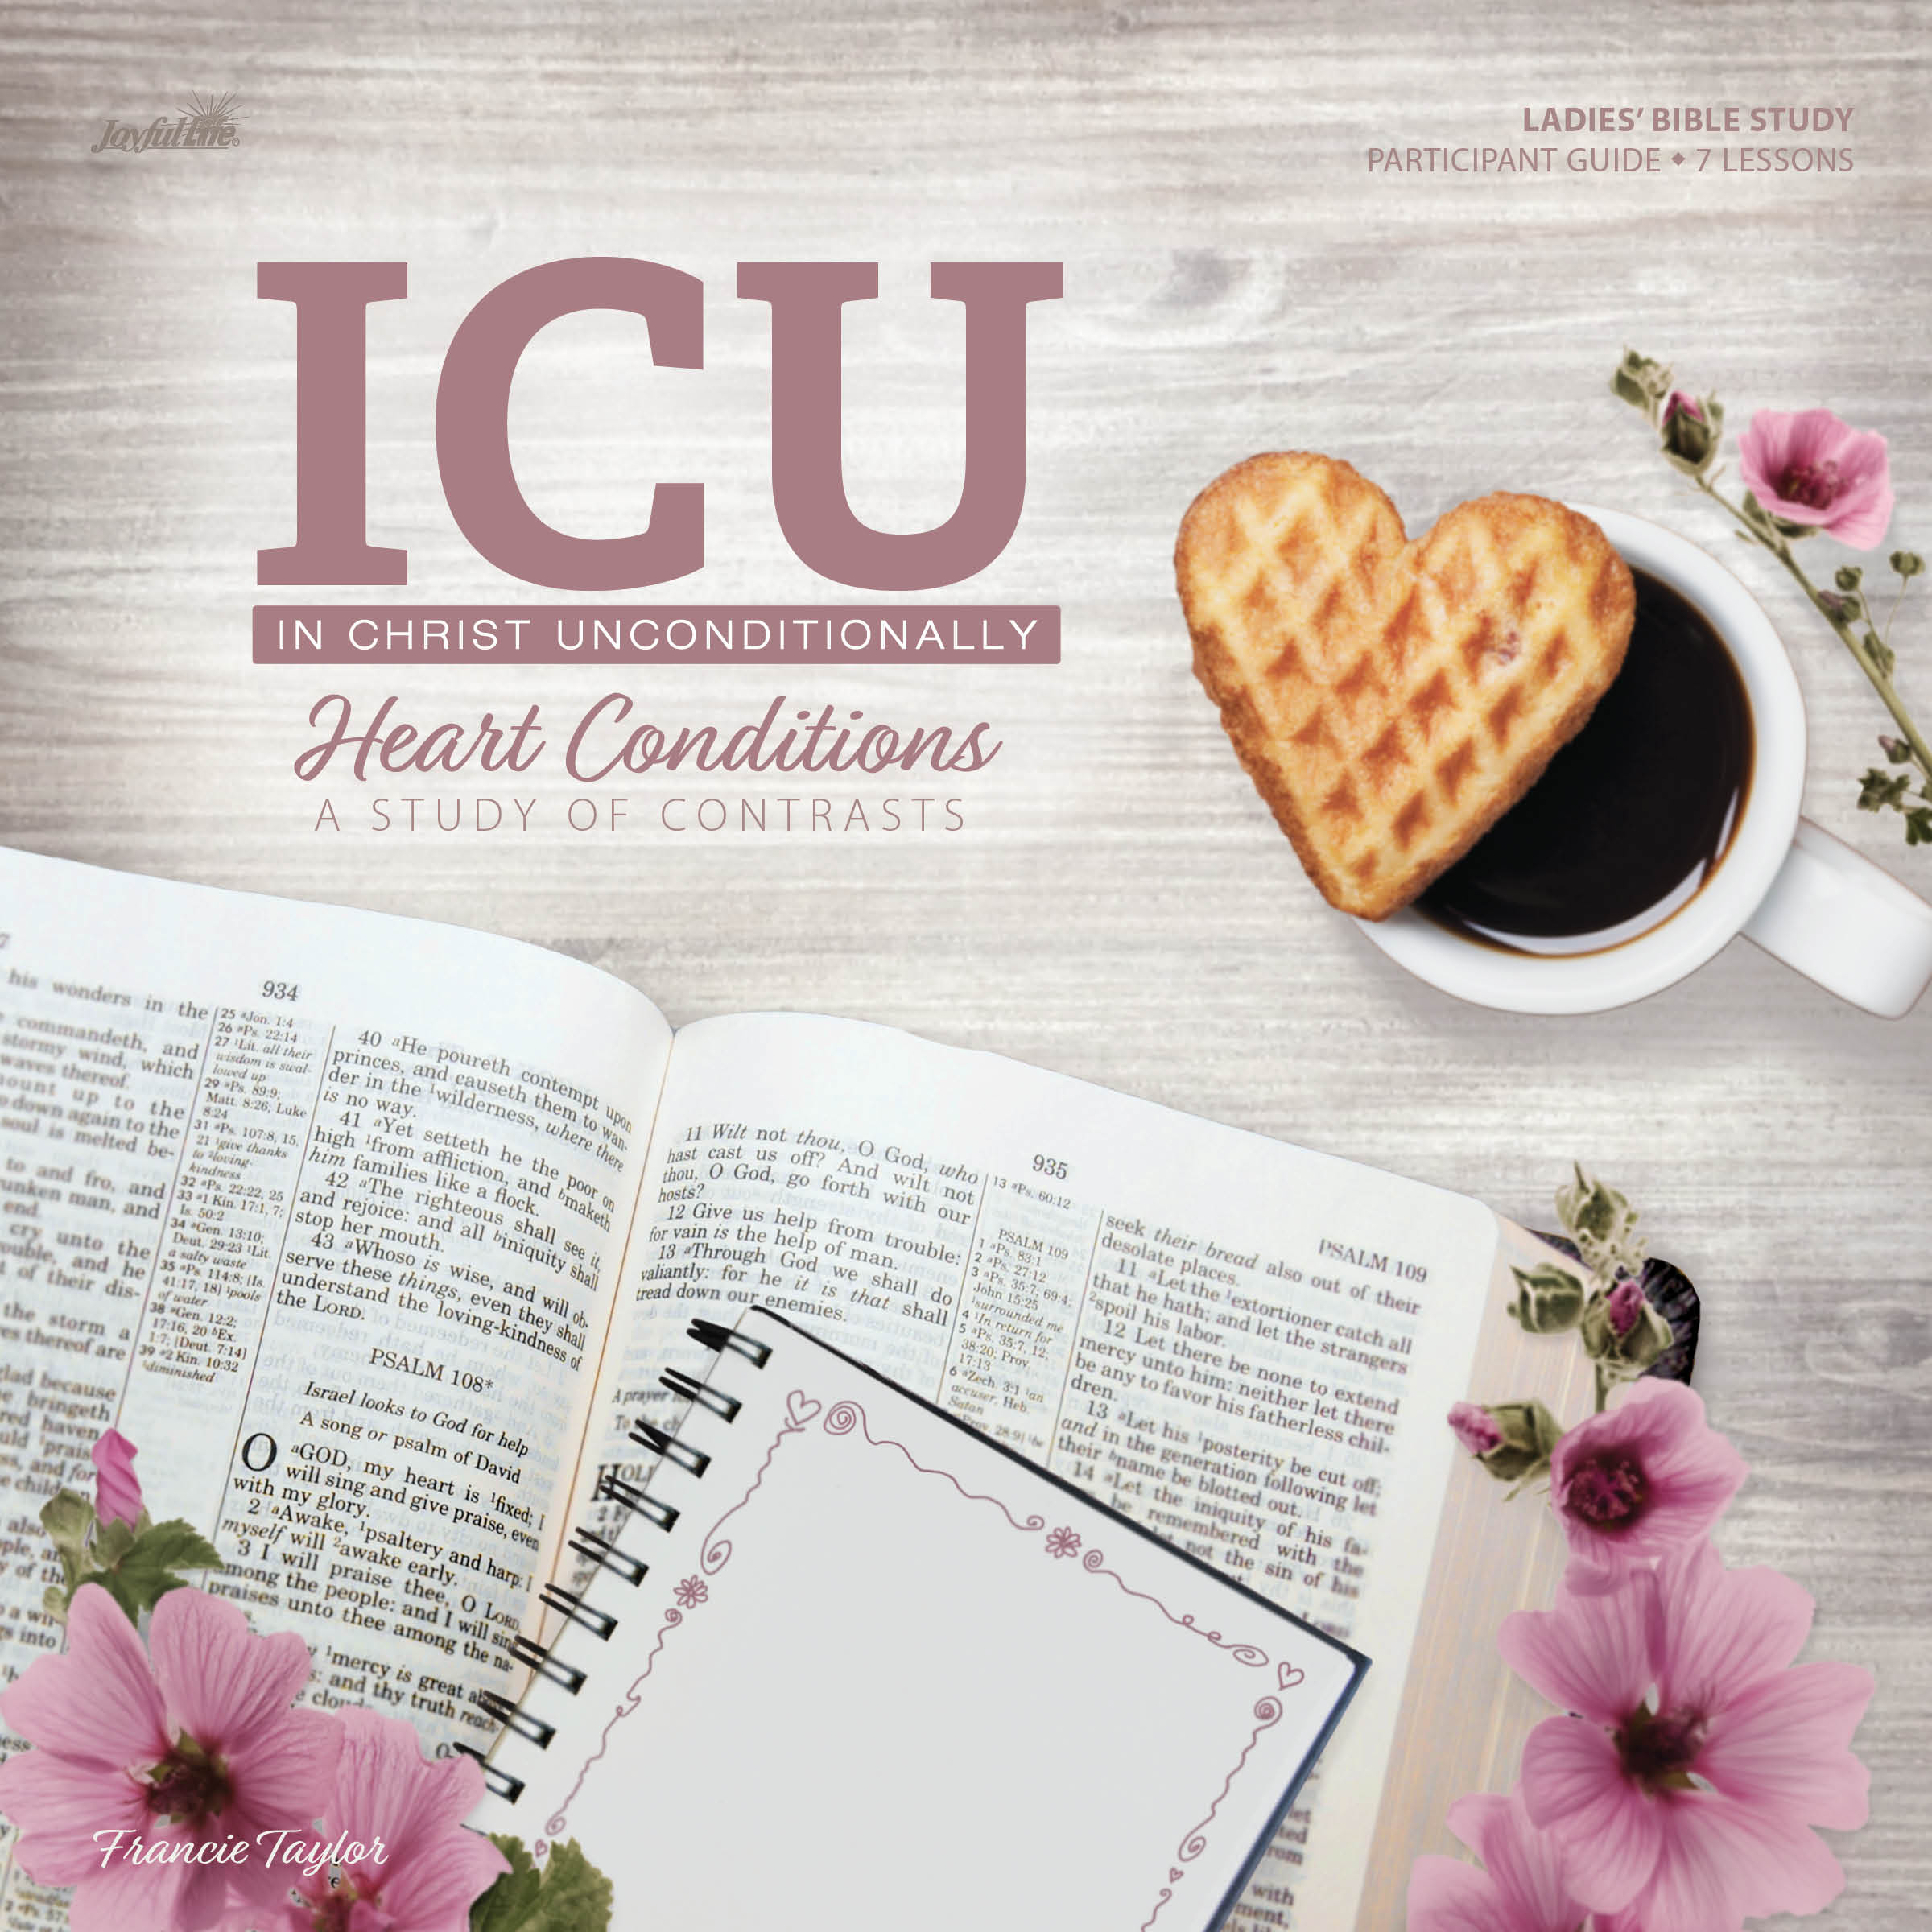 In Christ Unconditionally (ICU): Heart Conditions Participant